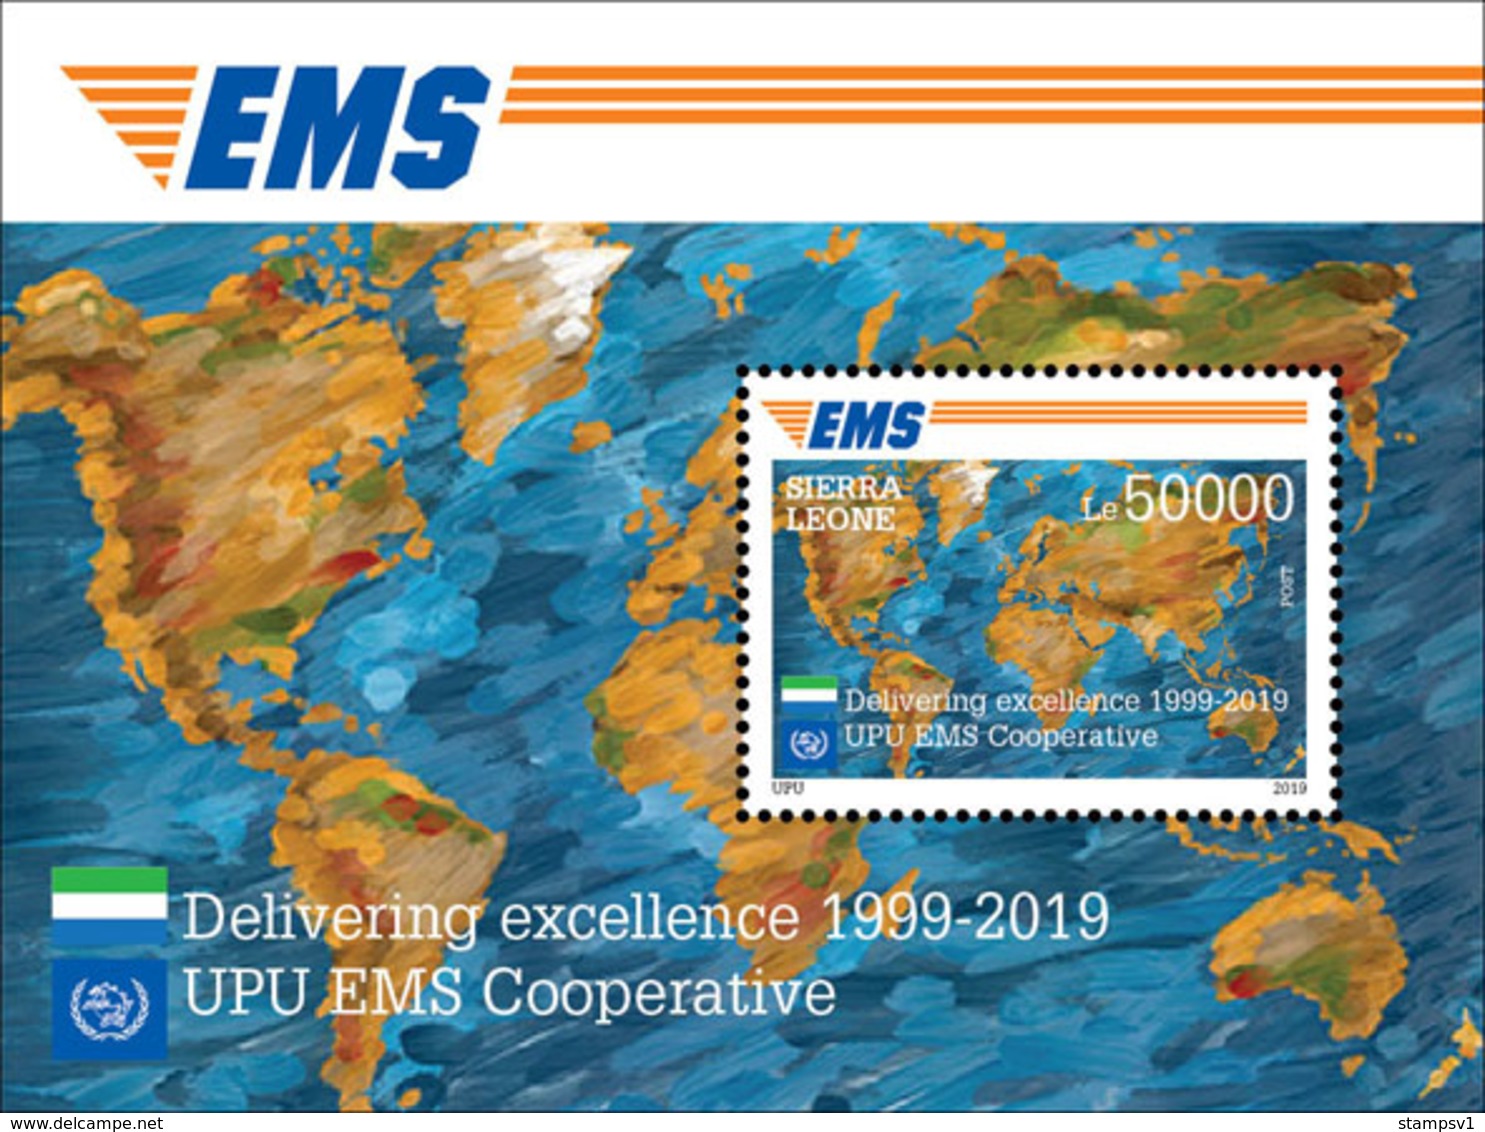 Sierra Leone. 2019 EMS (Delivering Excellence 1999-2019; UPU EMS Cooperative).  (1020b) OFFICIAL ISSUE - Post